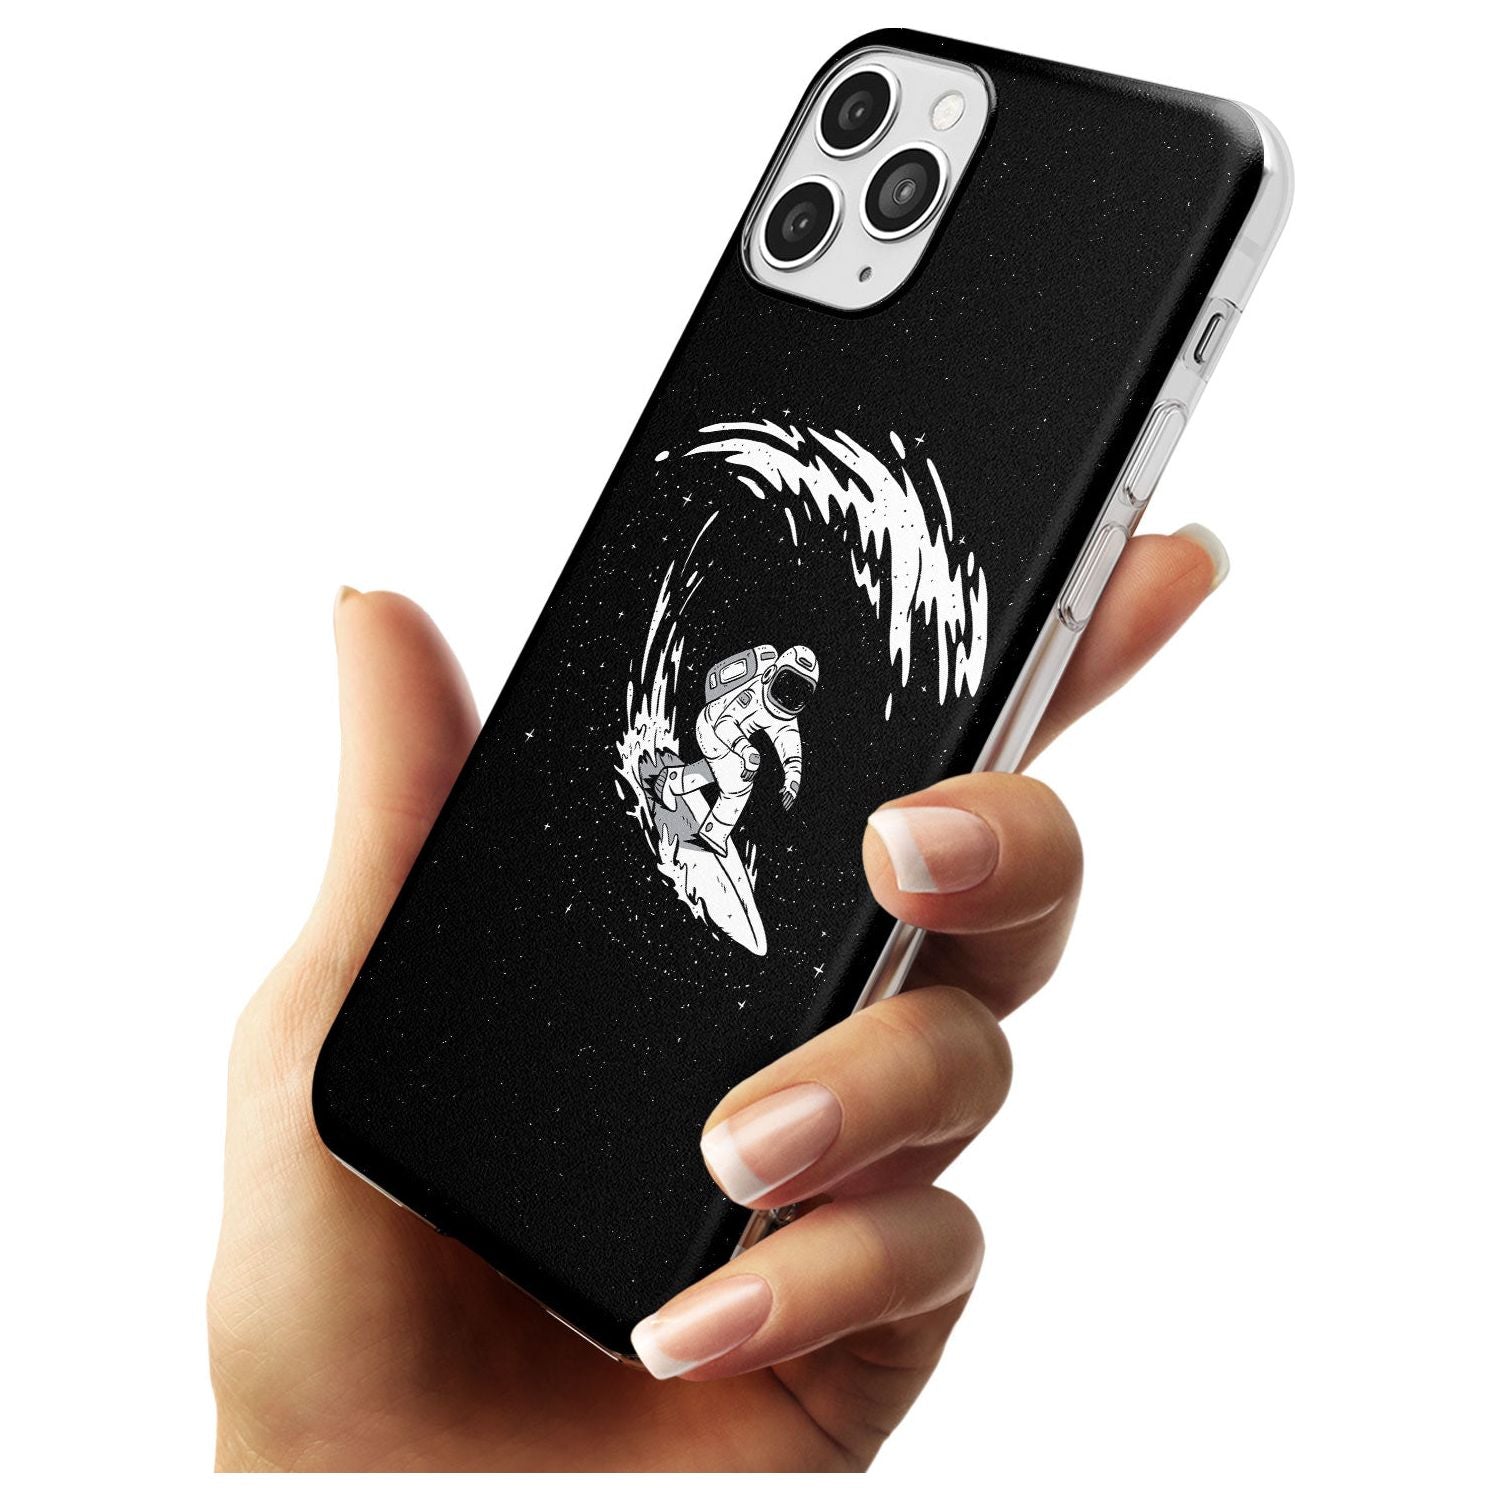 Surfing Astronaut Black Impact Phone Case for iPhone 11 Pro Max